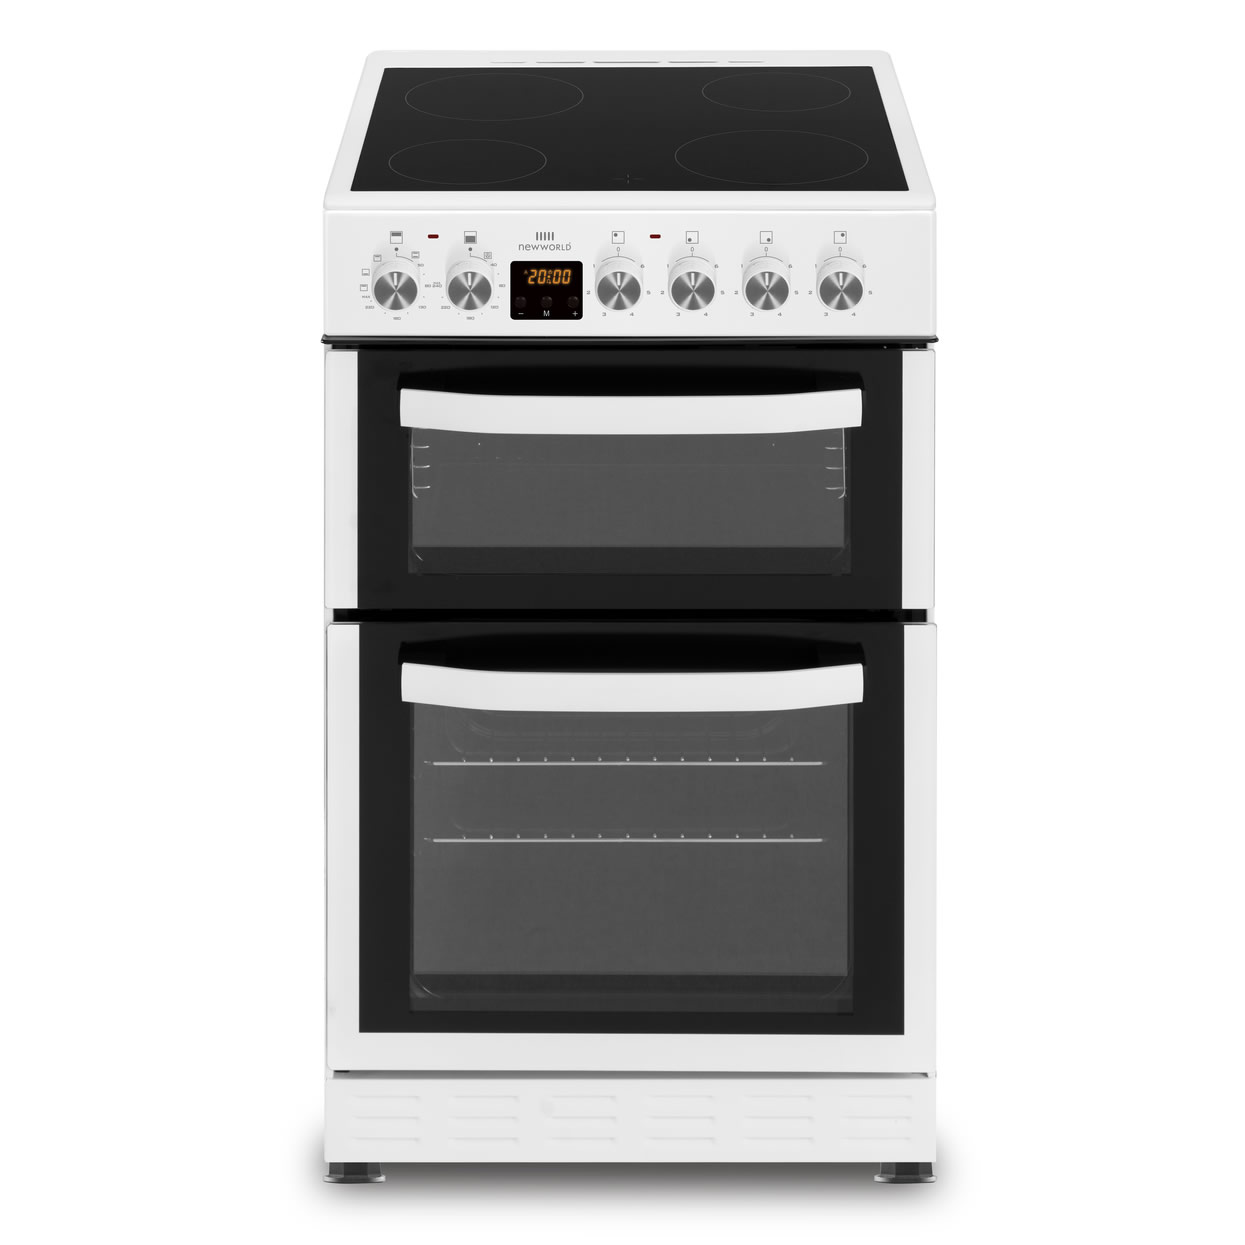 New-World 500mm Double Oven Electric Cooker Ceramic Hob White